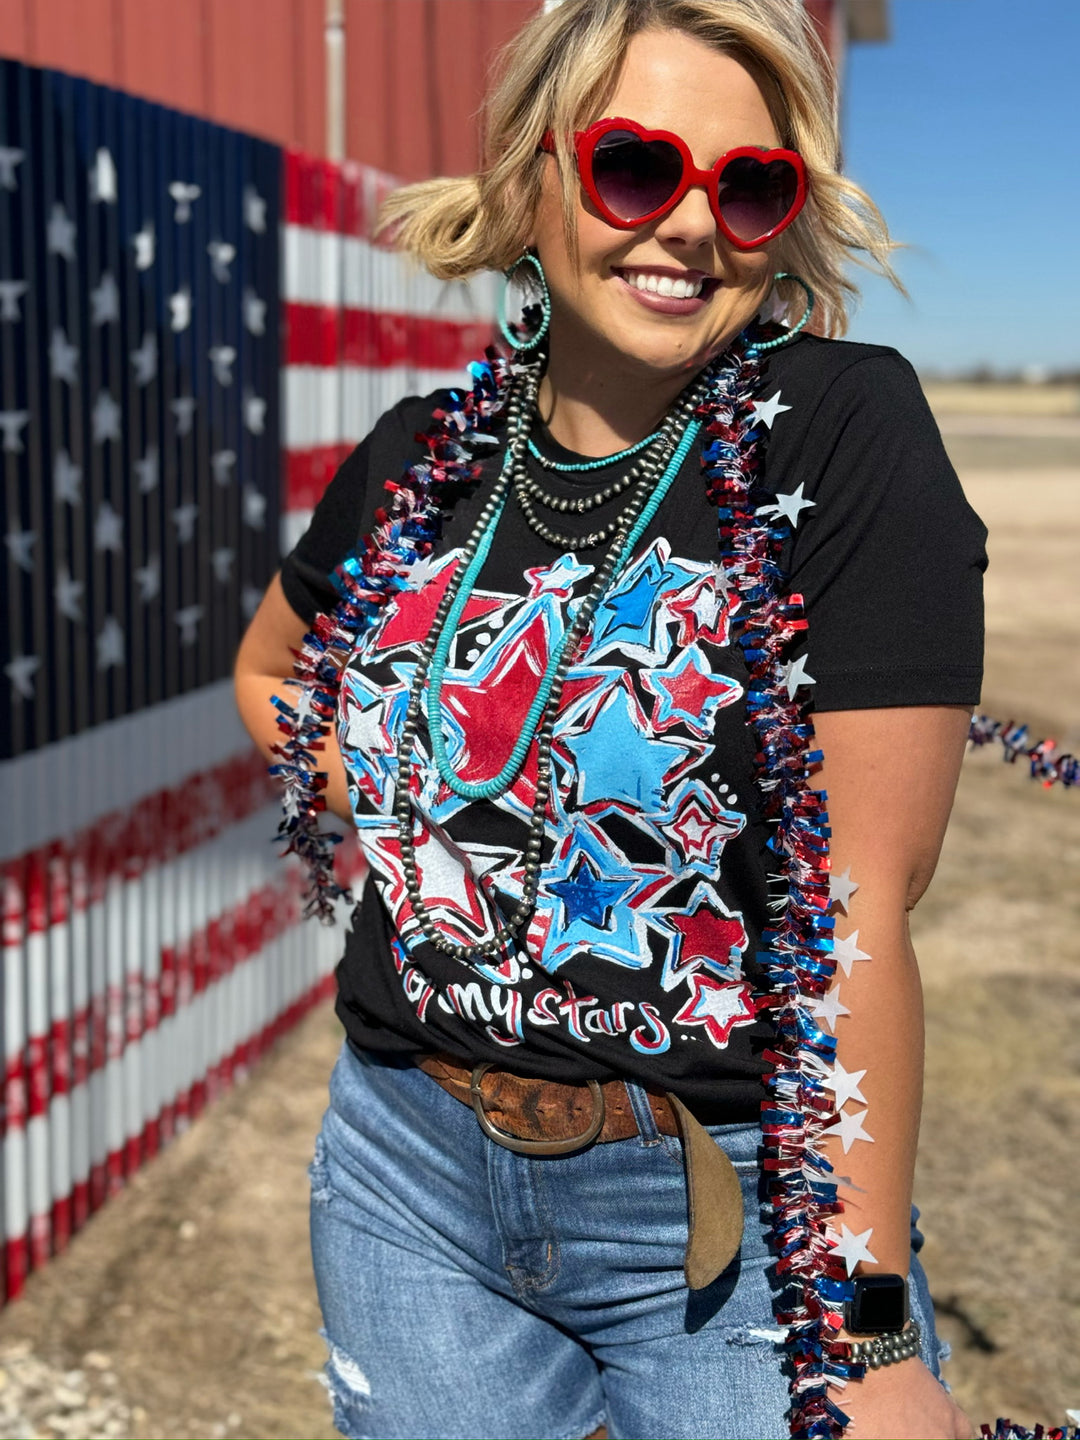 Oh My Stars Graphic Tee by Texas True Threads